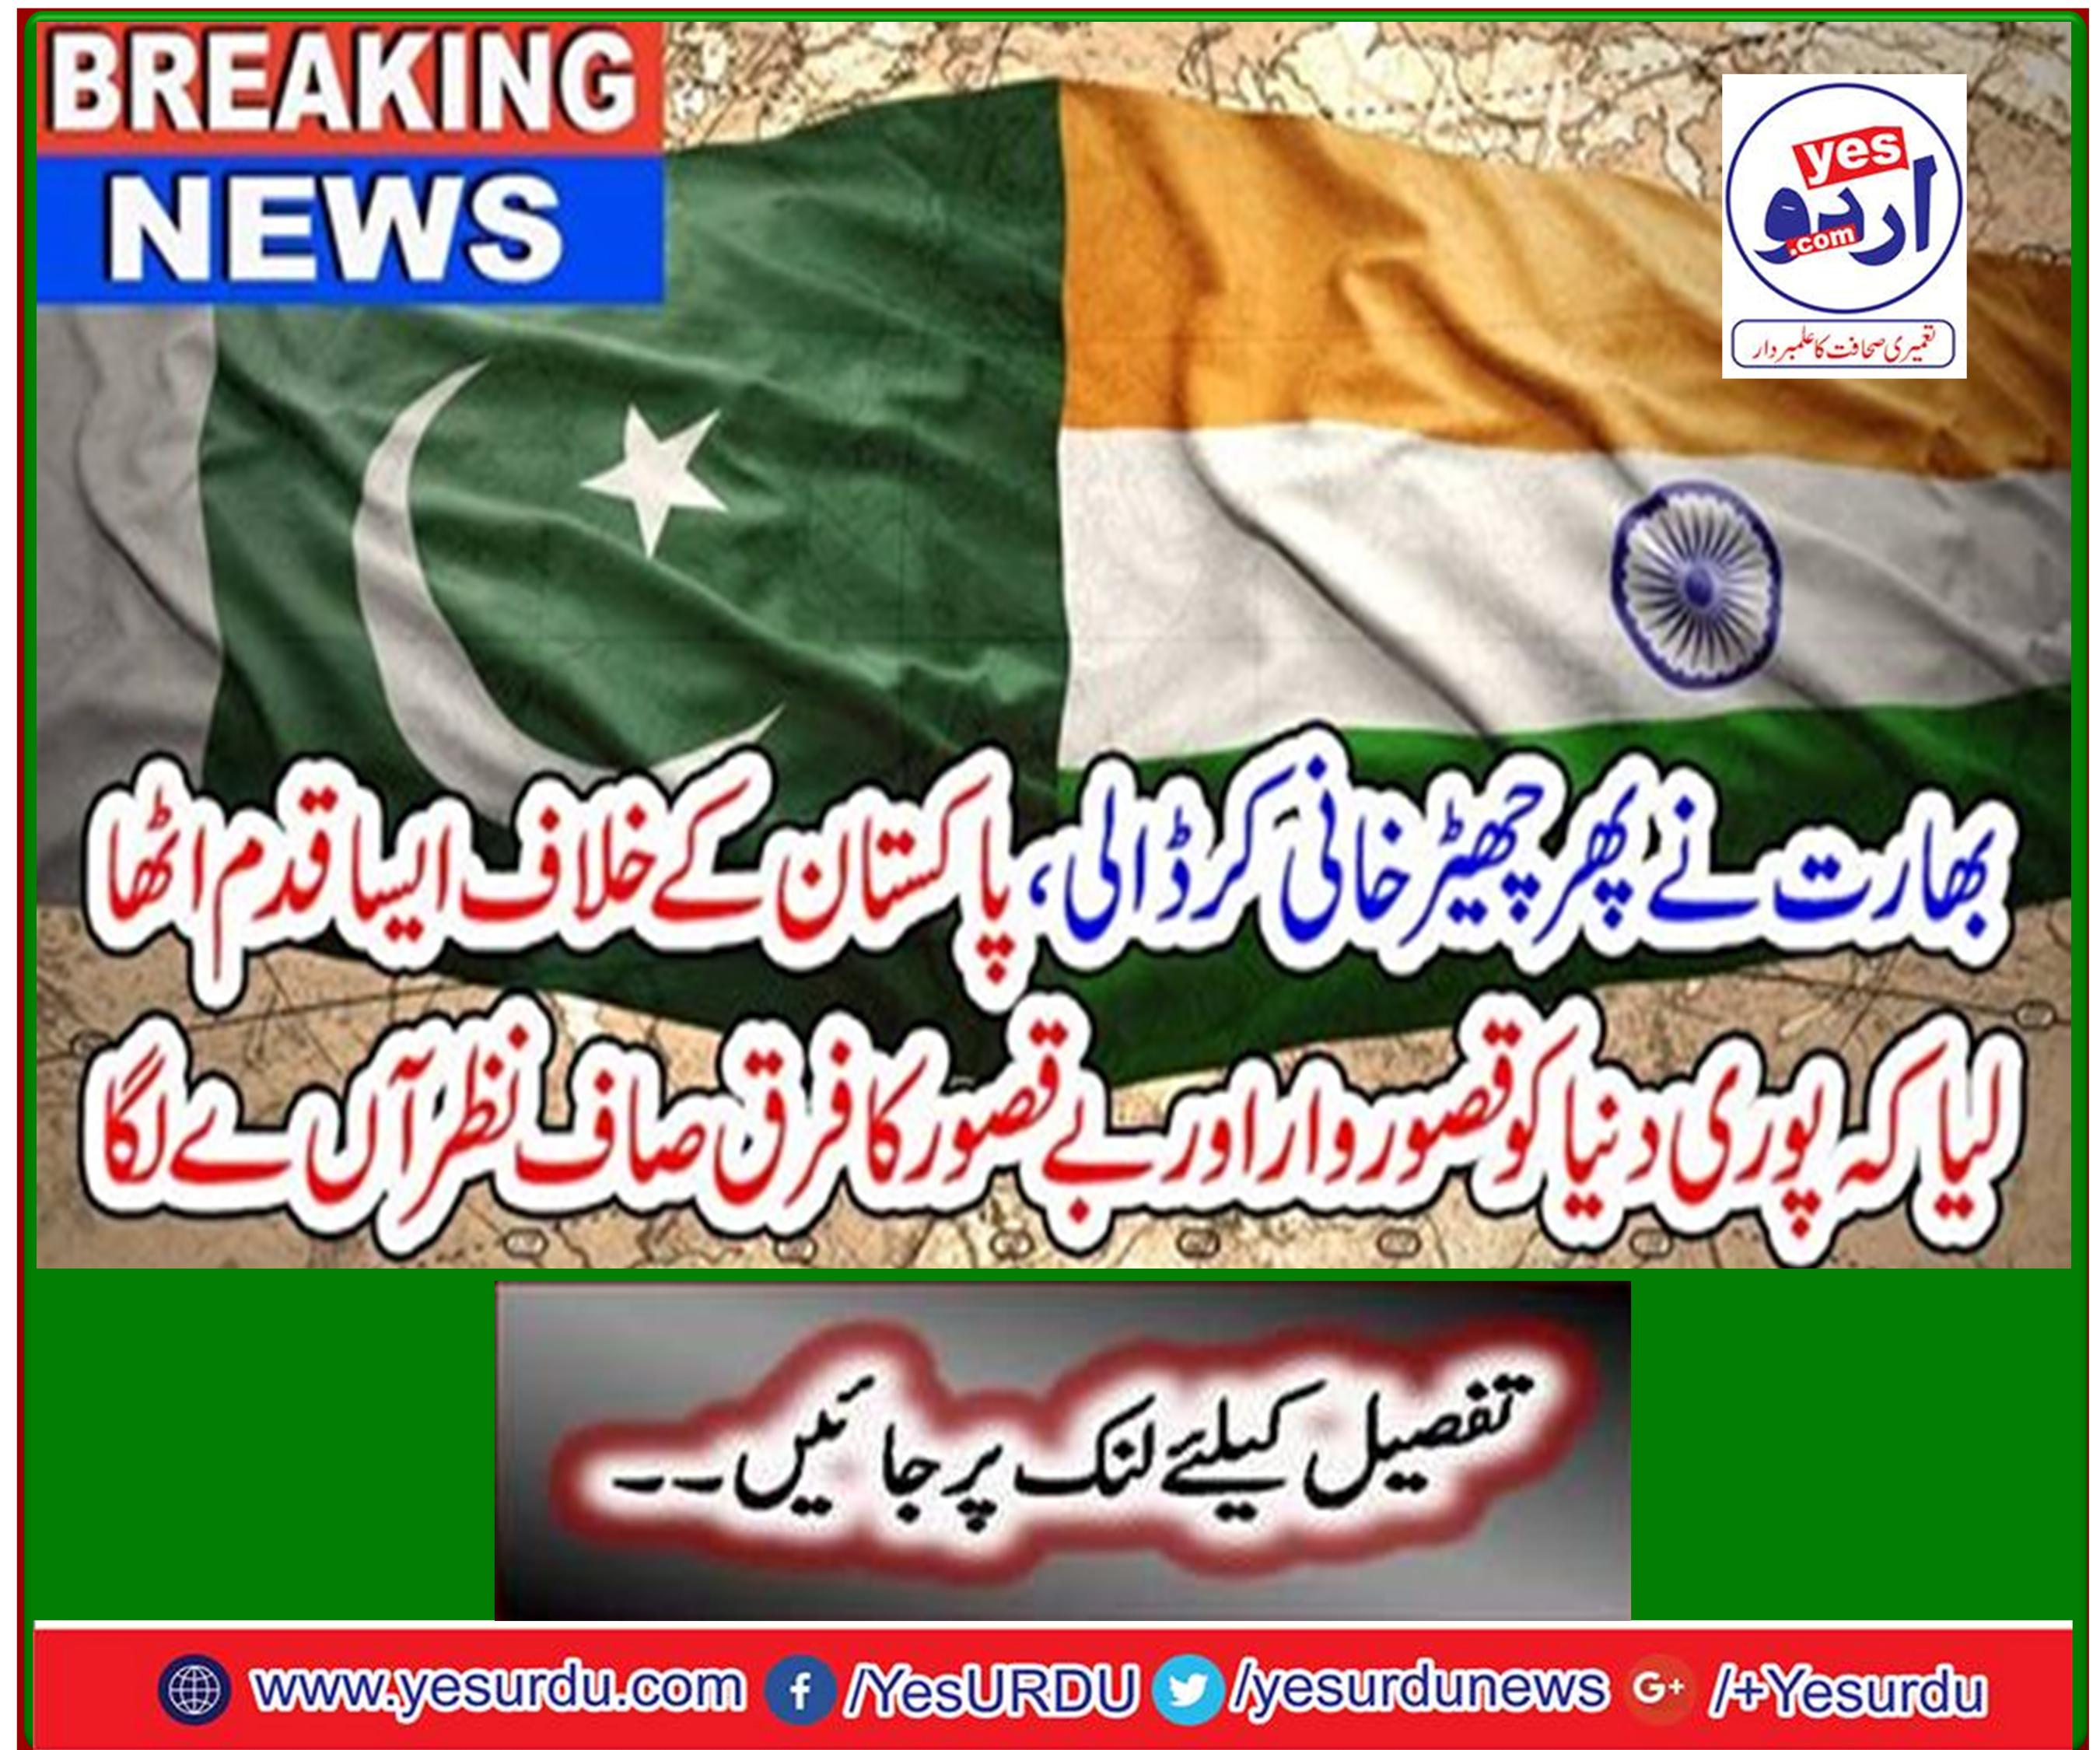 Breaking News: India again teased, took steps against Pakistan so that the whole world can see the difference between guilty and innocent